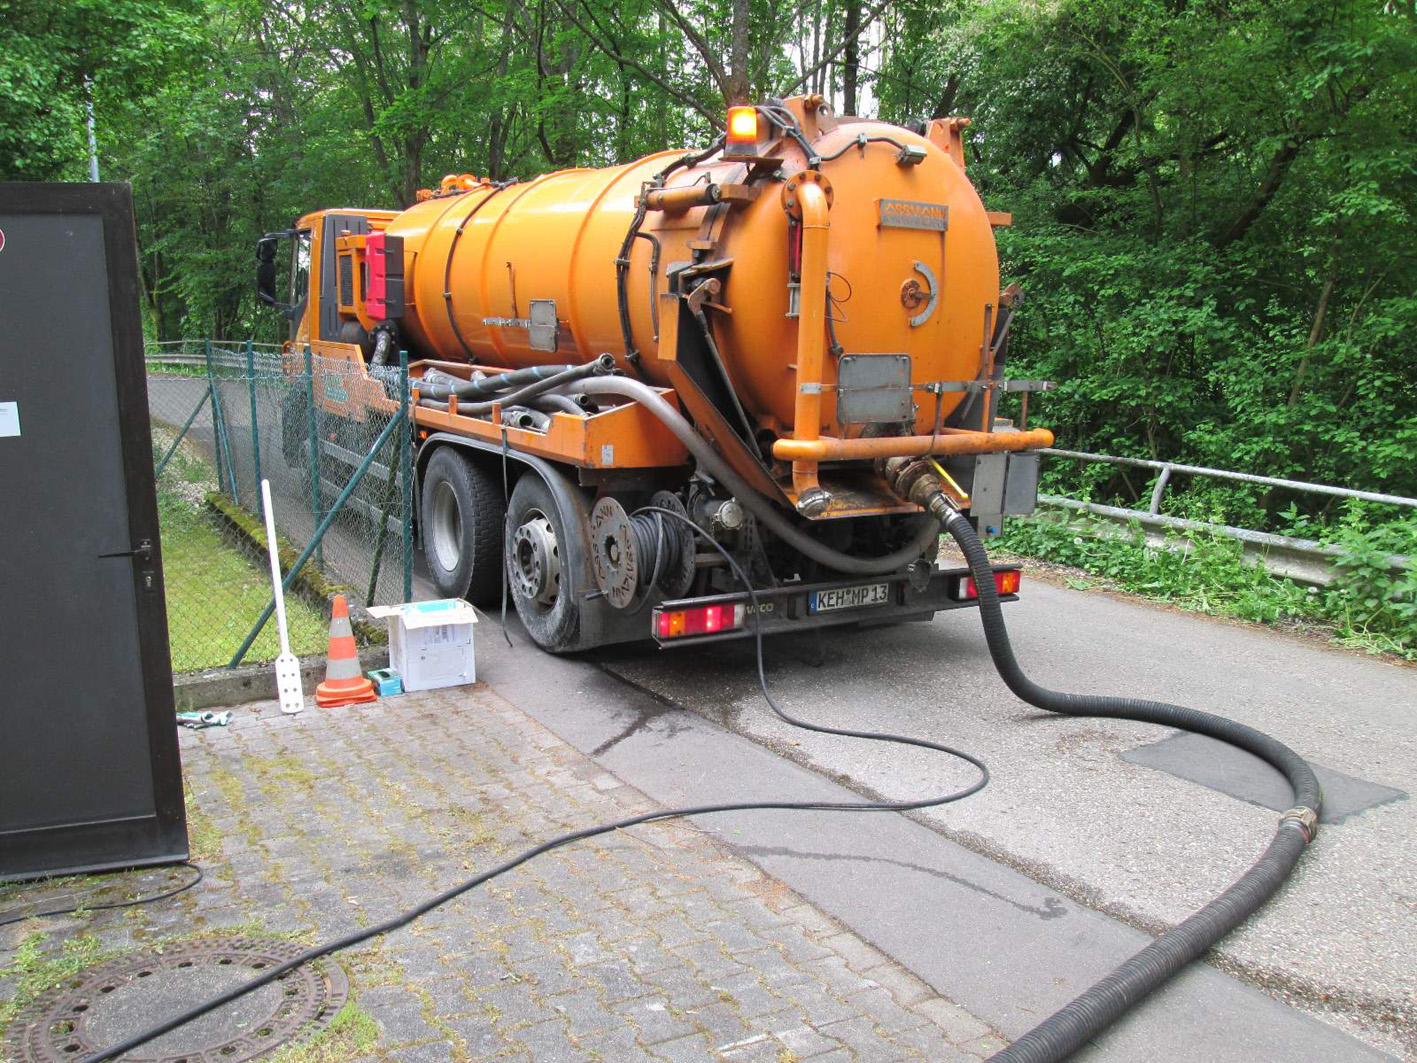 A pump truck is on standby 24 hours a day to deal with blockages at the Kelheim station.